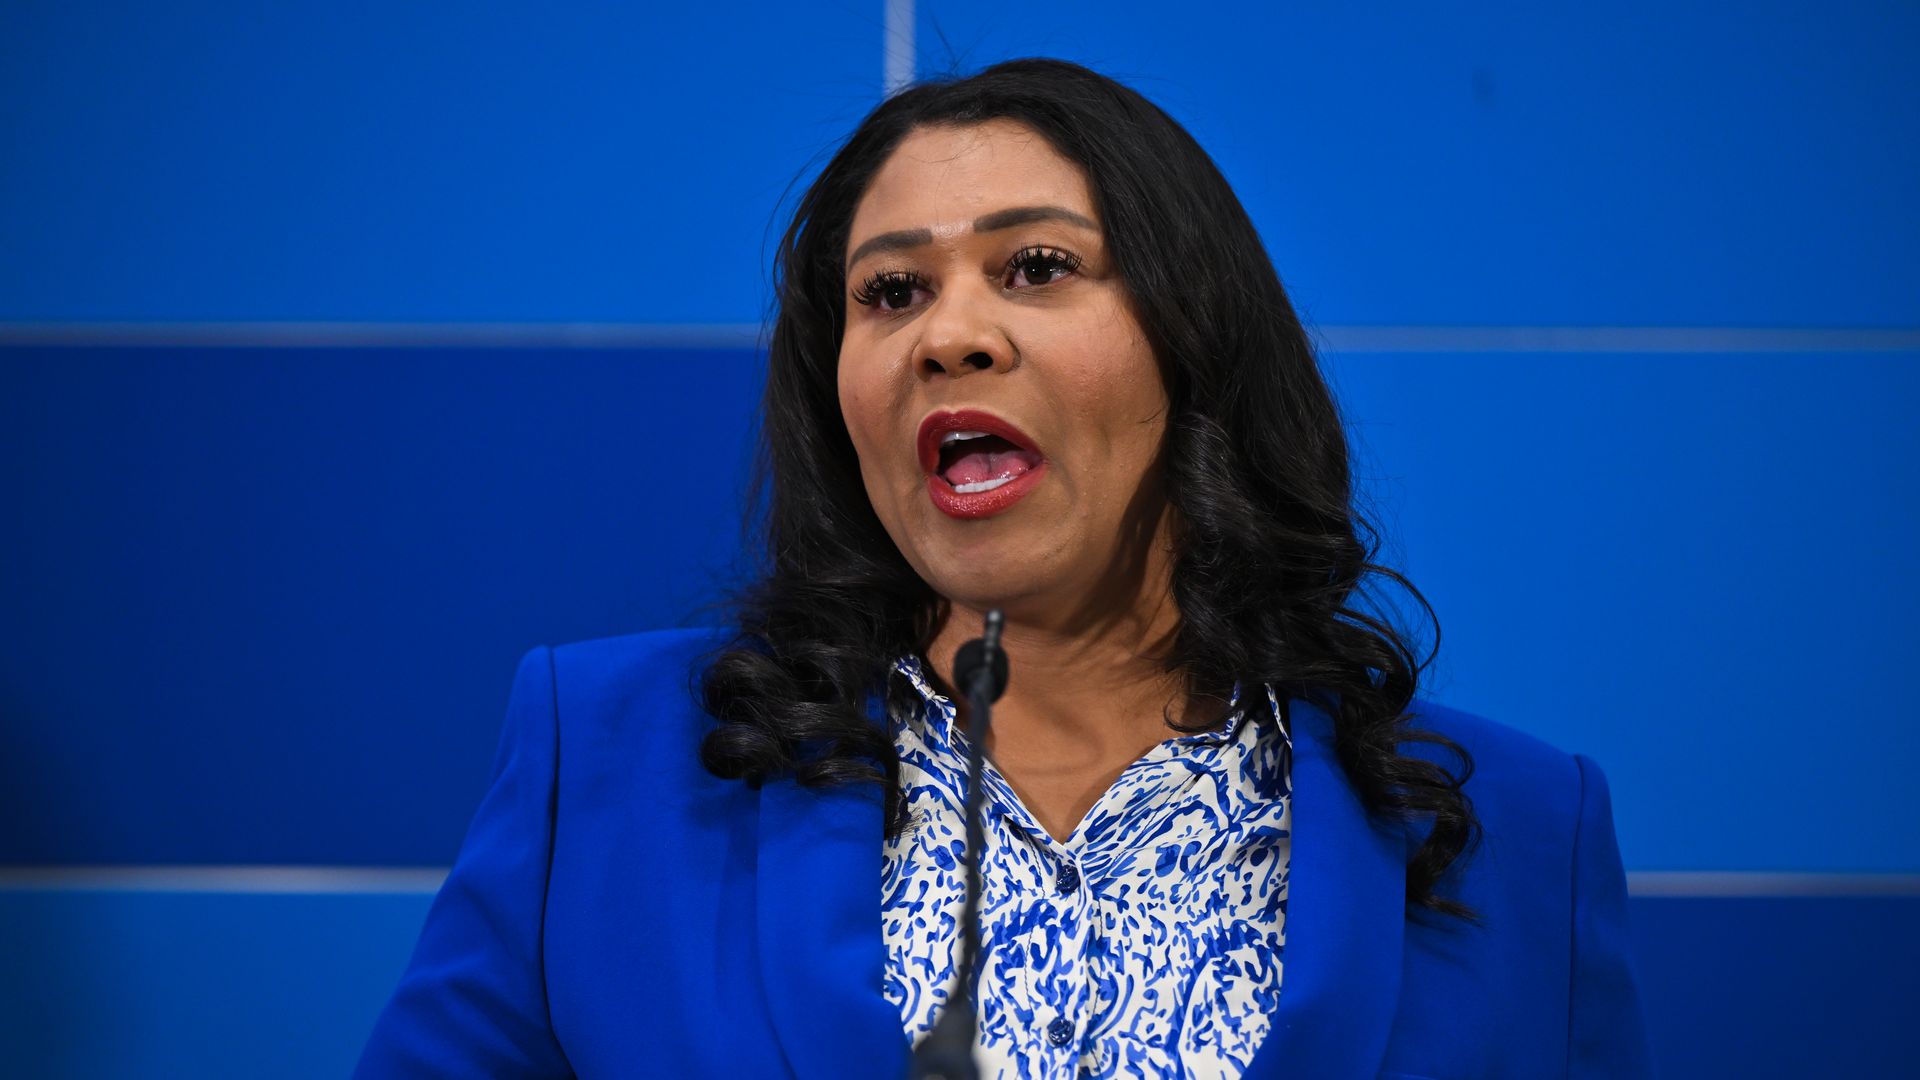 Photo of London Breed speak from a podium